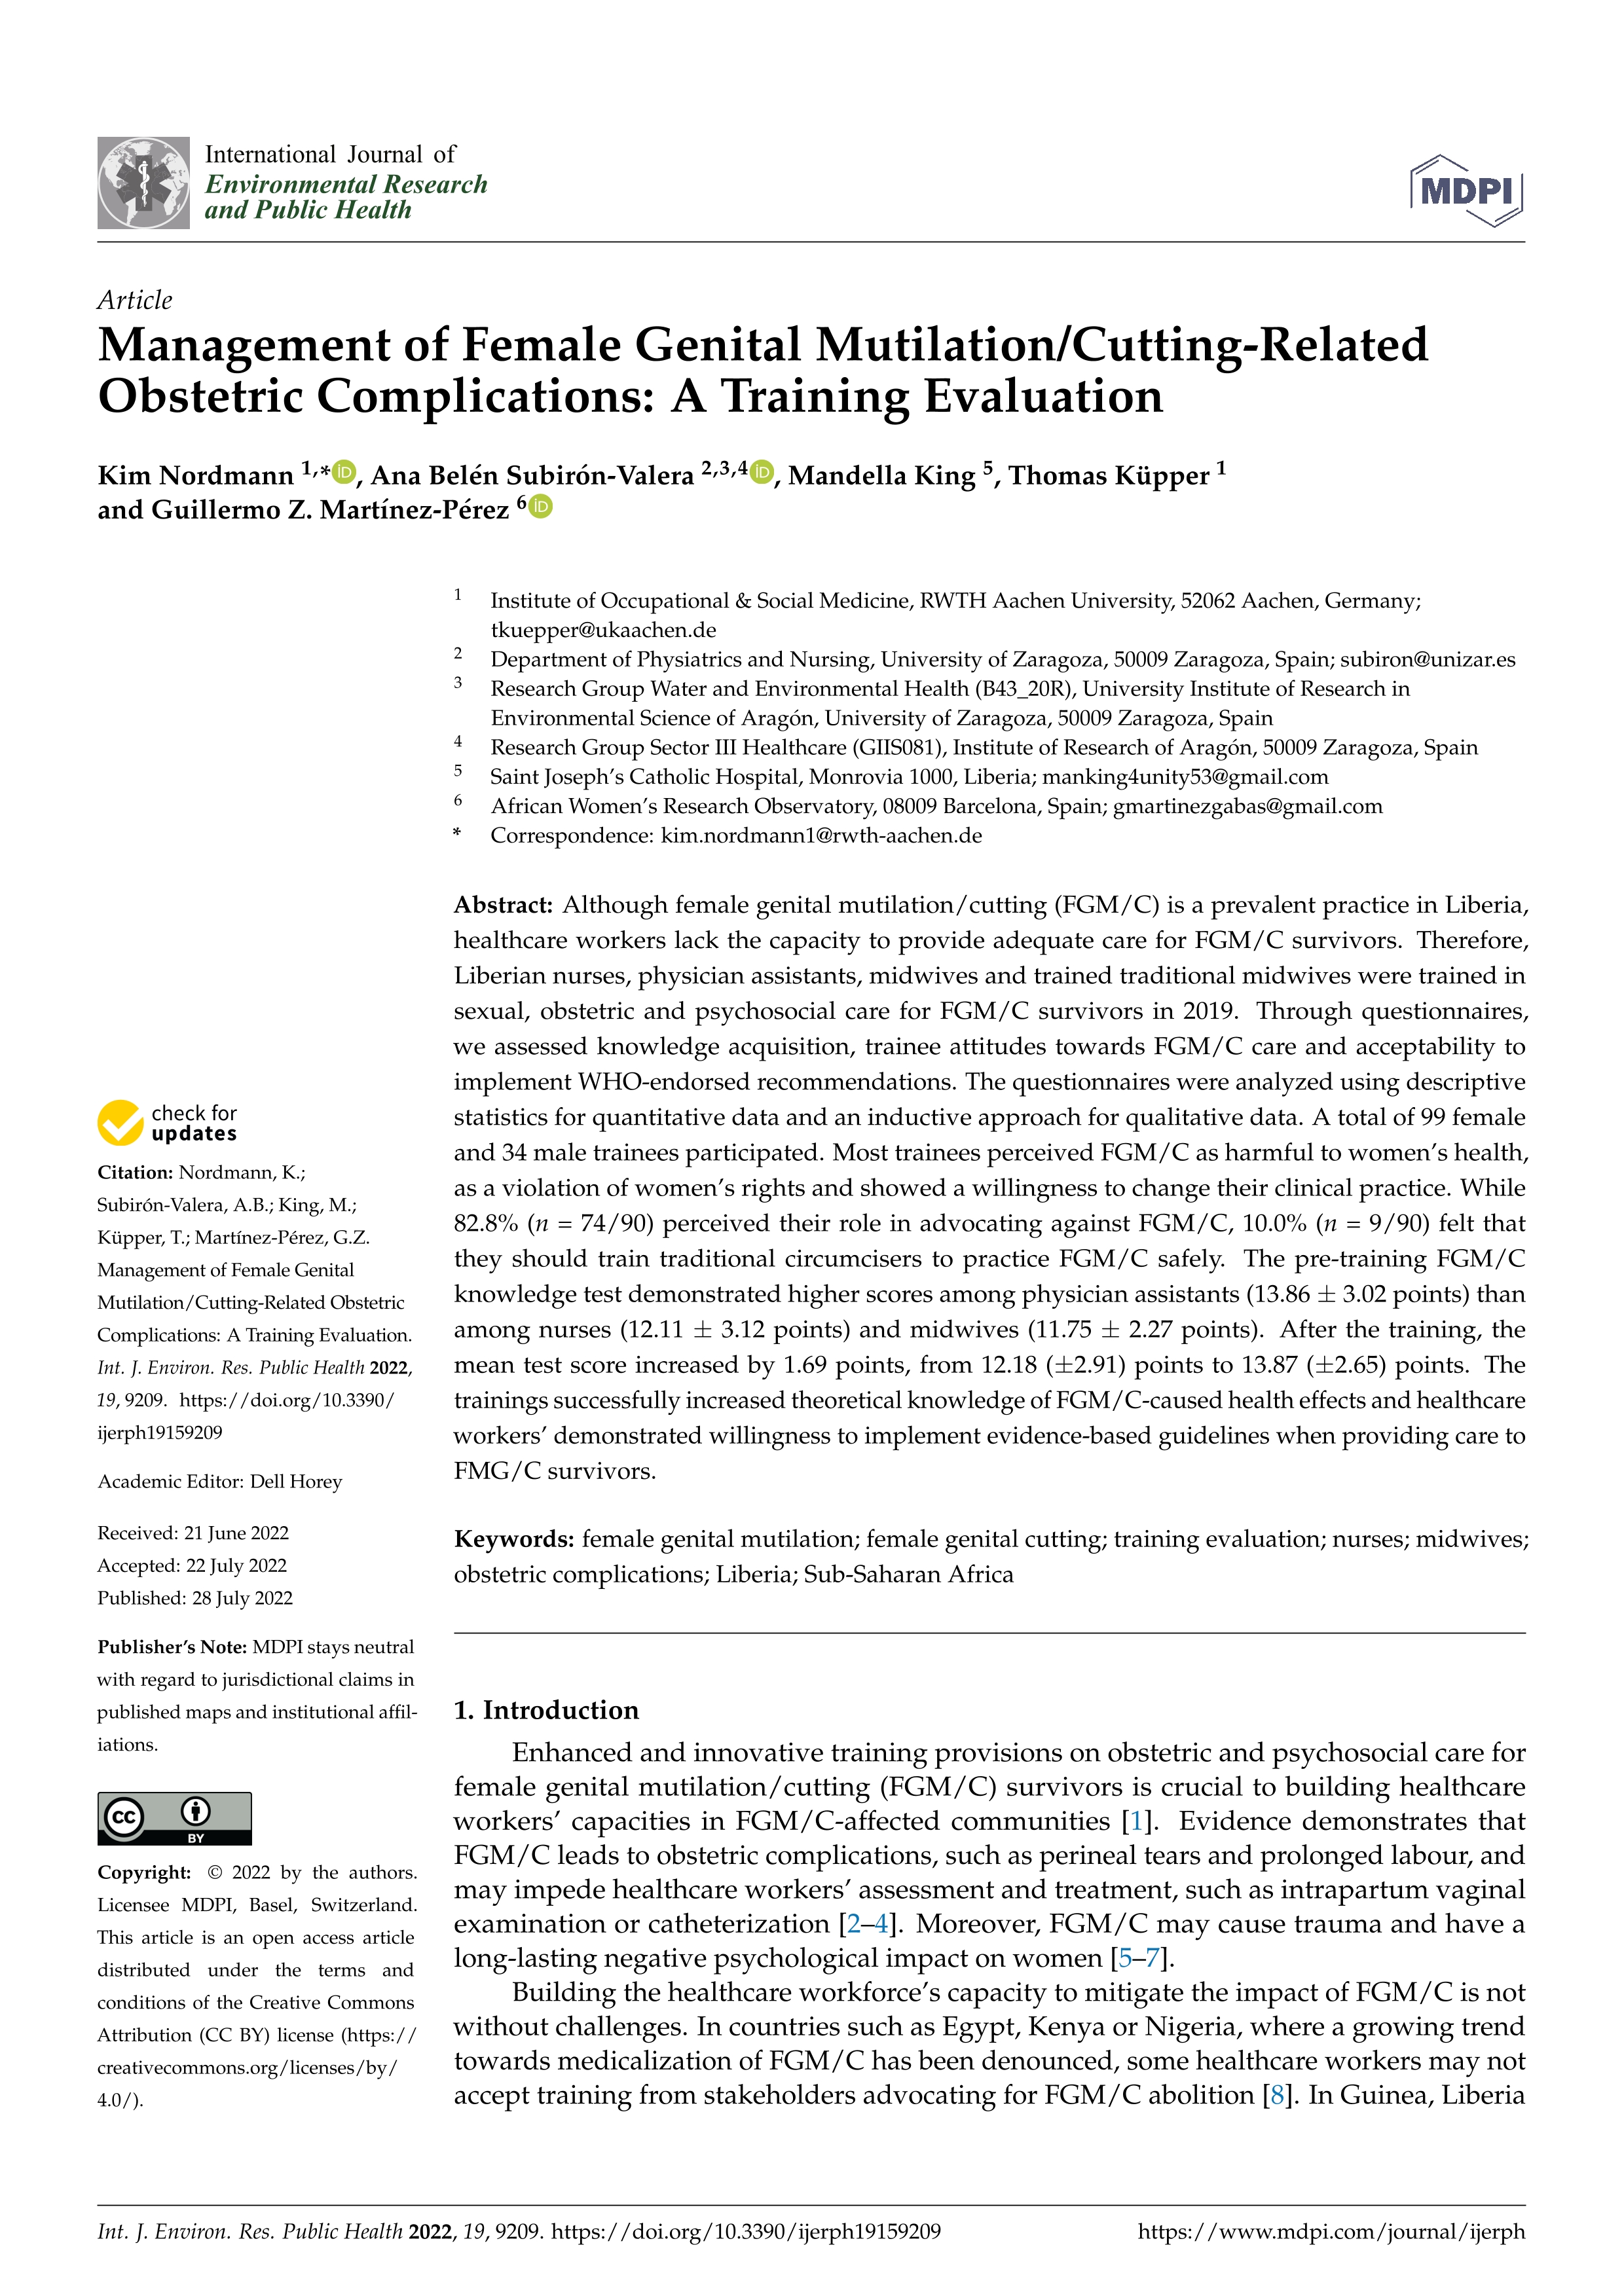 Management of female genital mutilation / cutting-related obstetric complications: a training evaluation